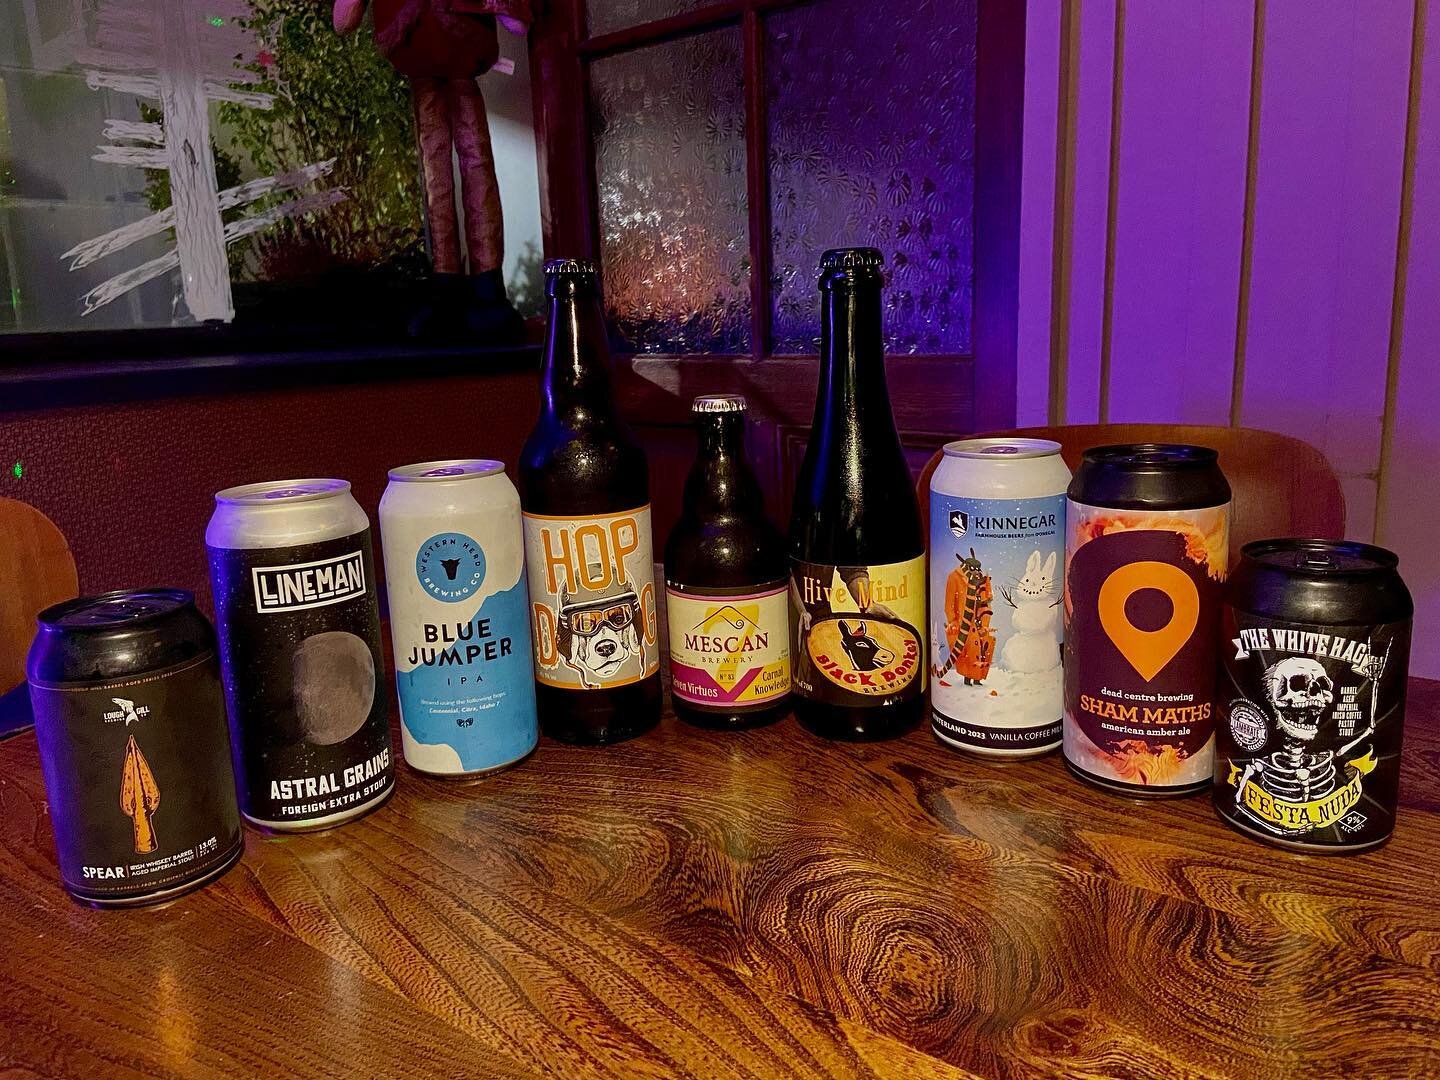 Need a gift for the beer lover in your life?

9 big flavour Irish beers &euro;46 with tasting notes. 

Message us or pop into the bar this week to order one!

#bridgeSt #somethingDifferent #castlebar